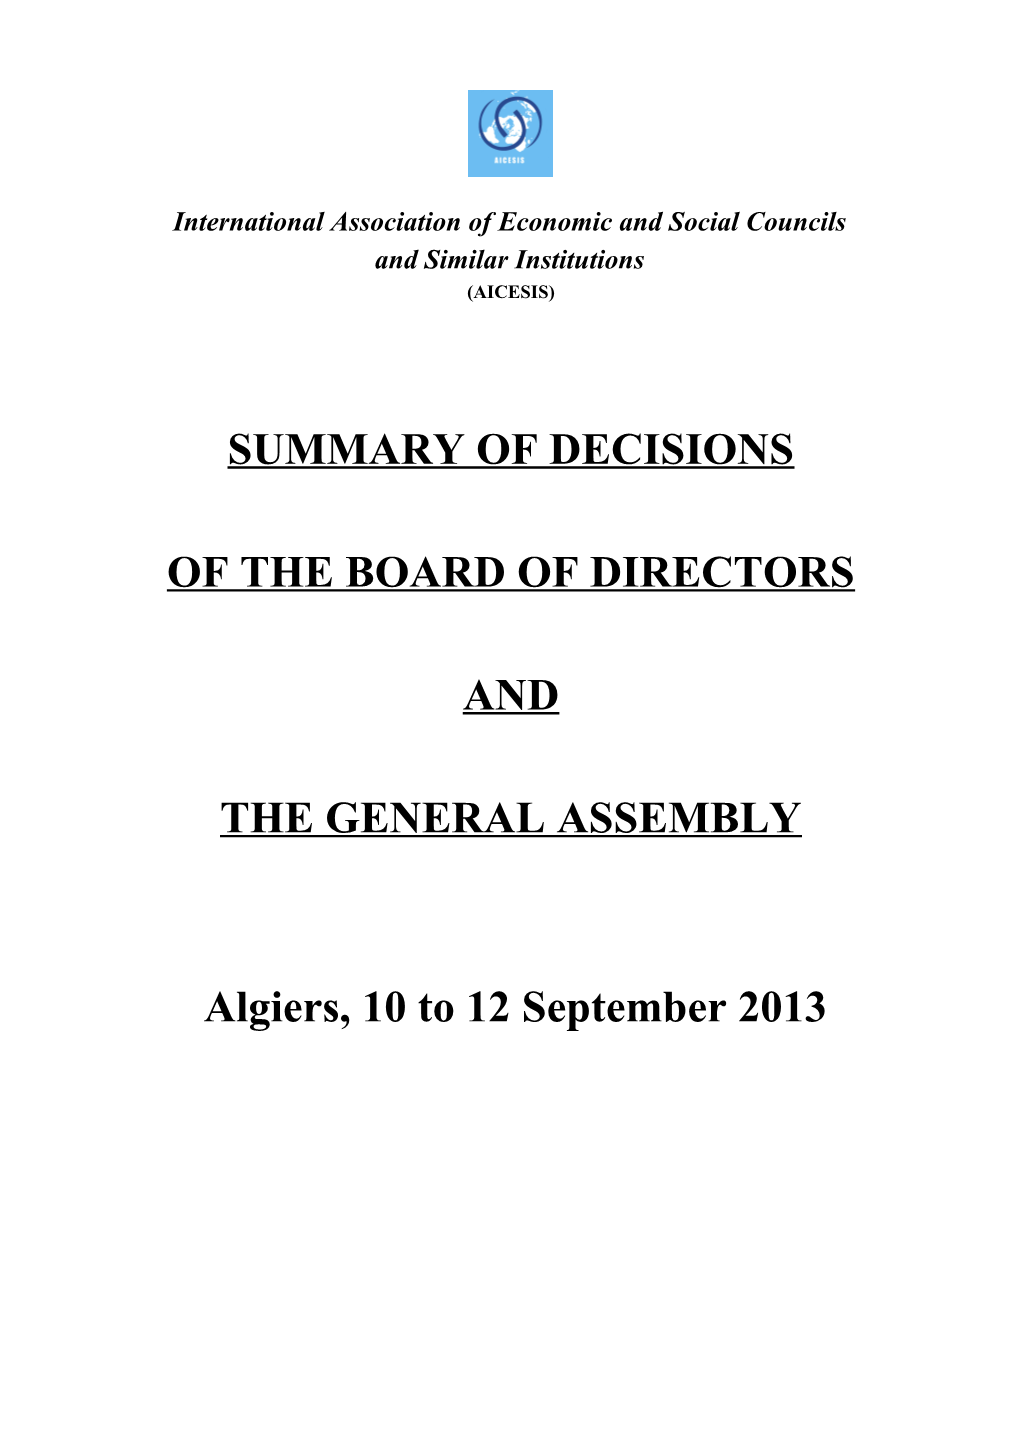 SUMMARY of DECISIONS of the BOARD of DIRECTORS and the GENERAL ASSEMBLY, Algiers, 10 To